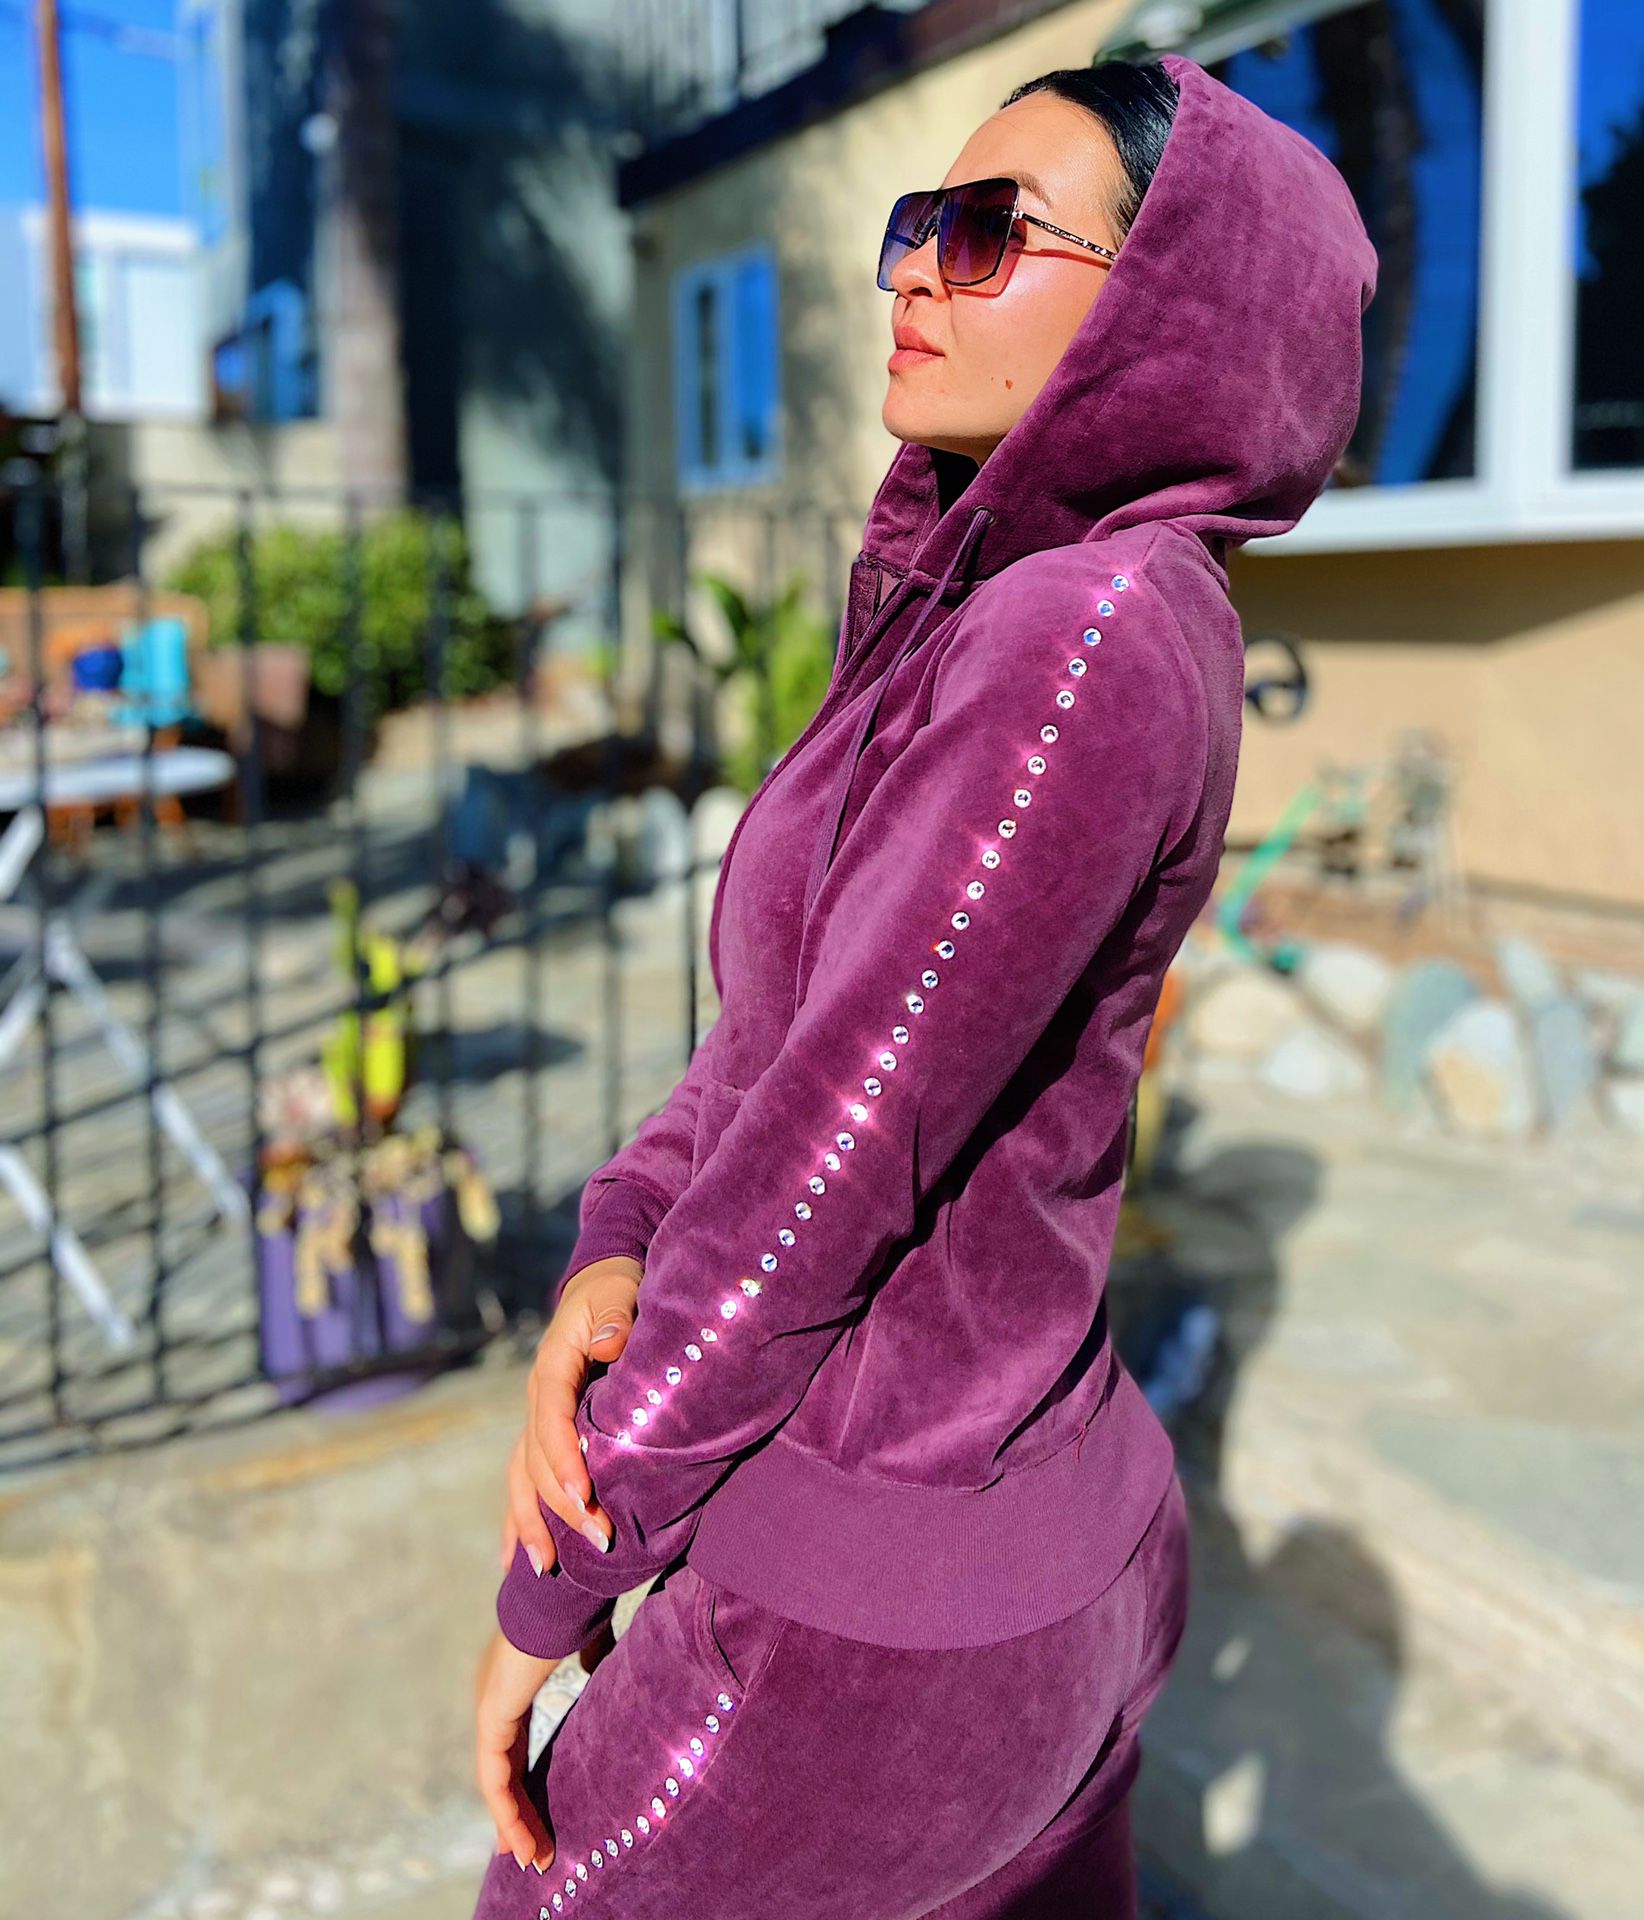 Women’s Louis Vuitton tracksuit for Sale in Wylie, TX - OfferUp